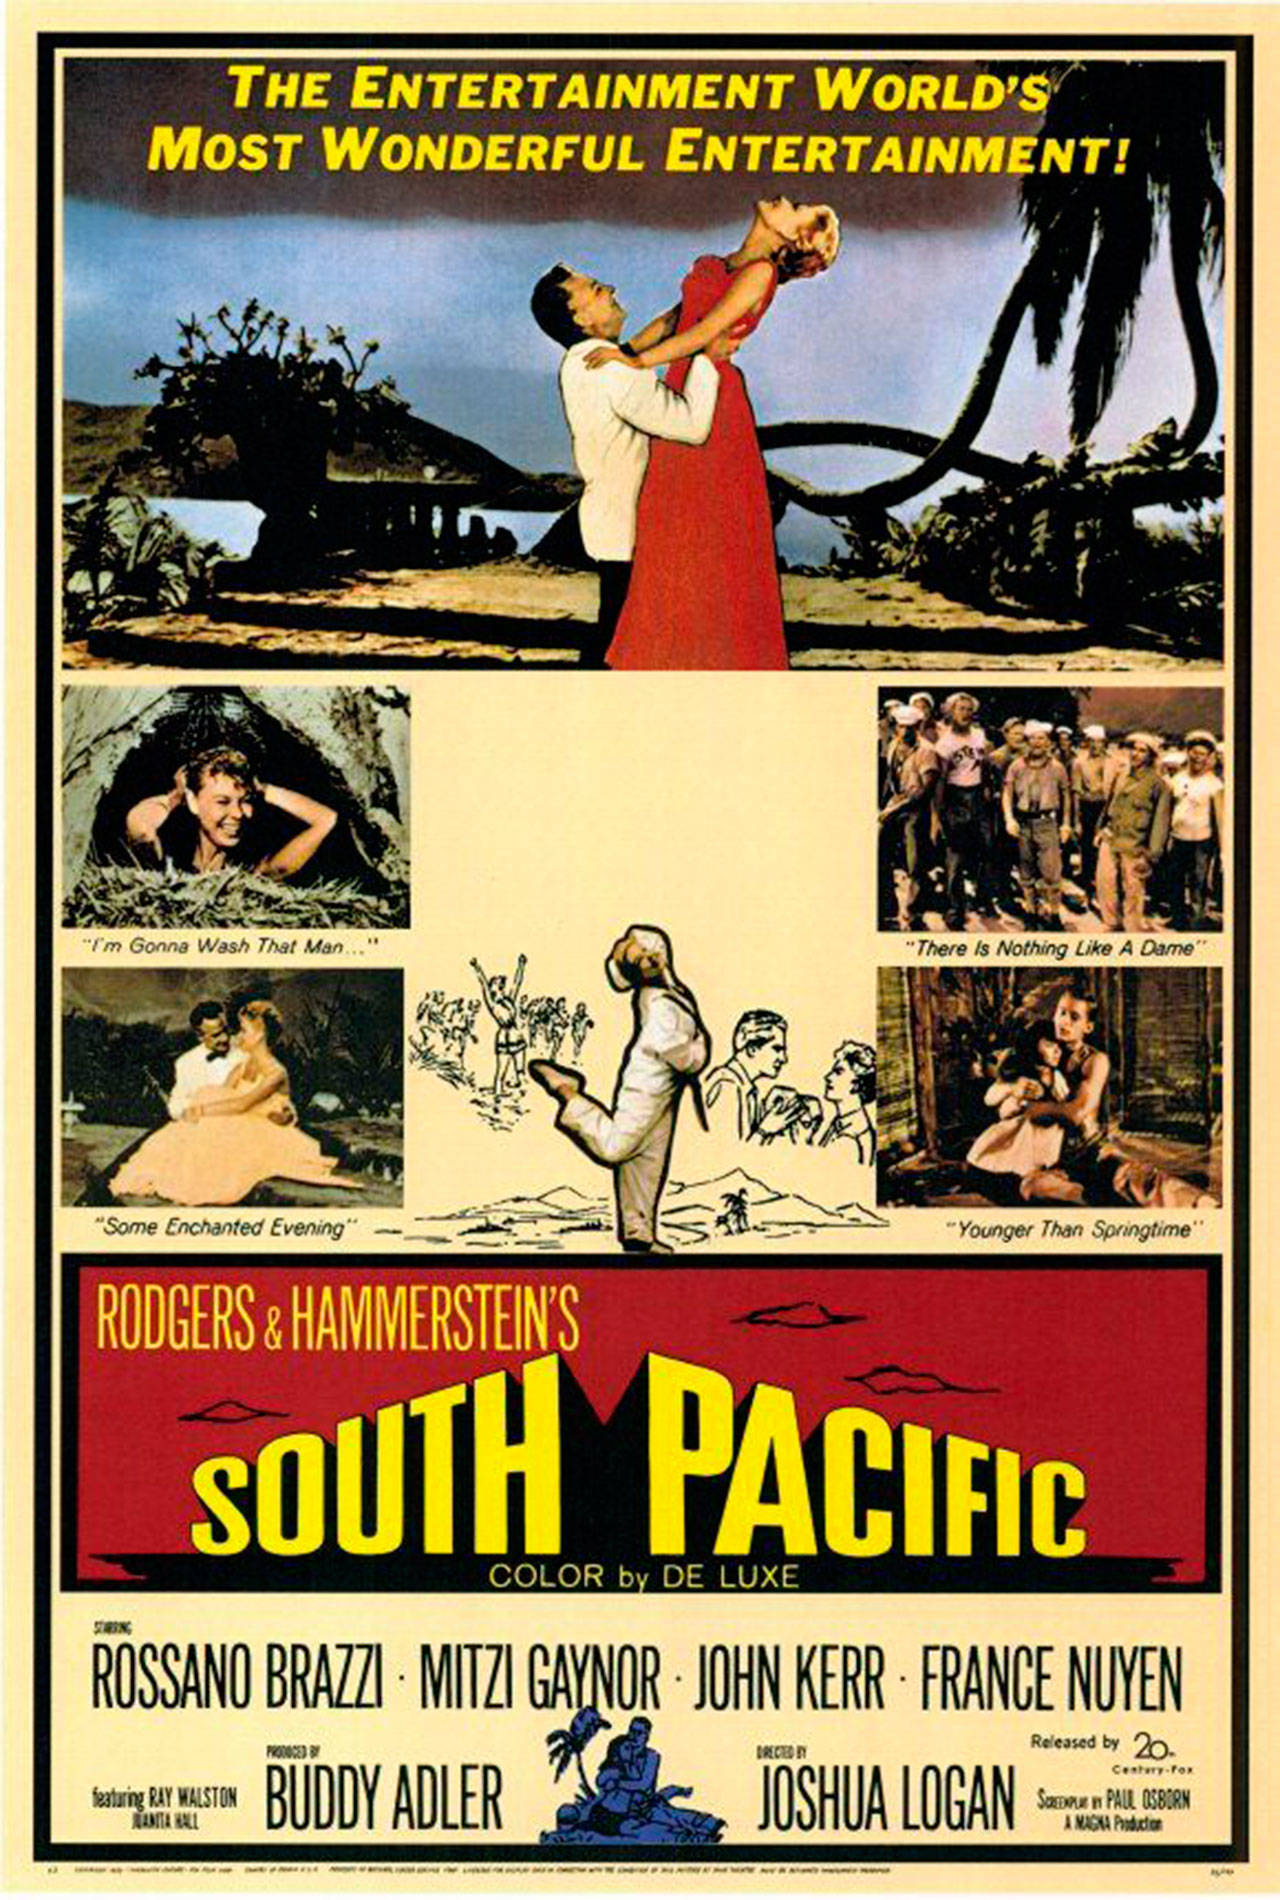 Image courtesy of 20th Century Fox | “South Pacific,” the 1958 American romantic musical film based on the Rodgers and Hammerstein musical of the same name, will return to the big screen at Bainbridge Cinemas at 7 p.m. Wednesday, Aug. 29.